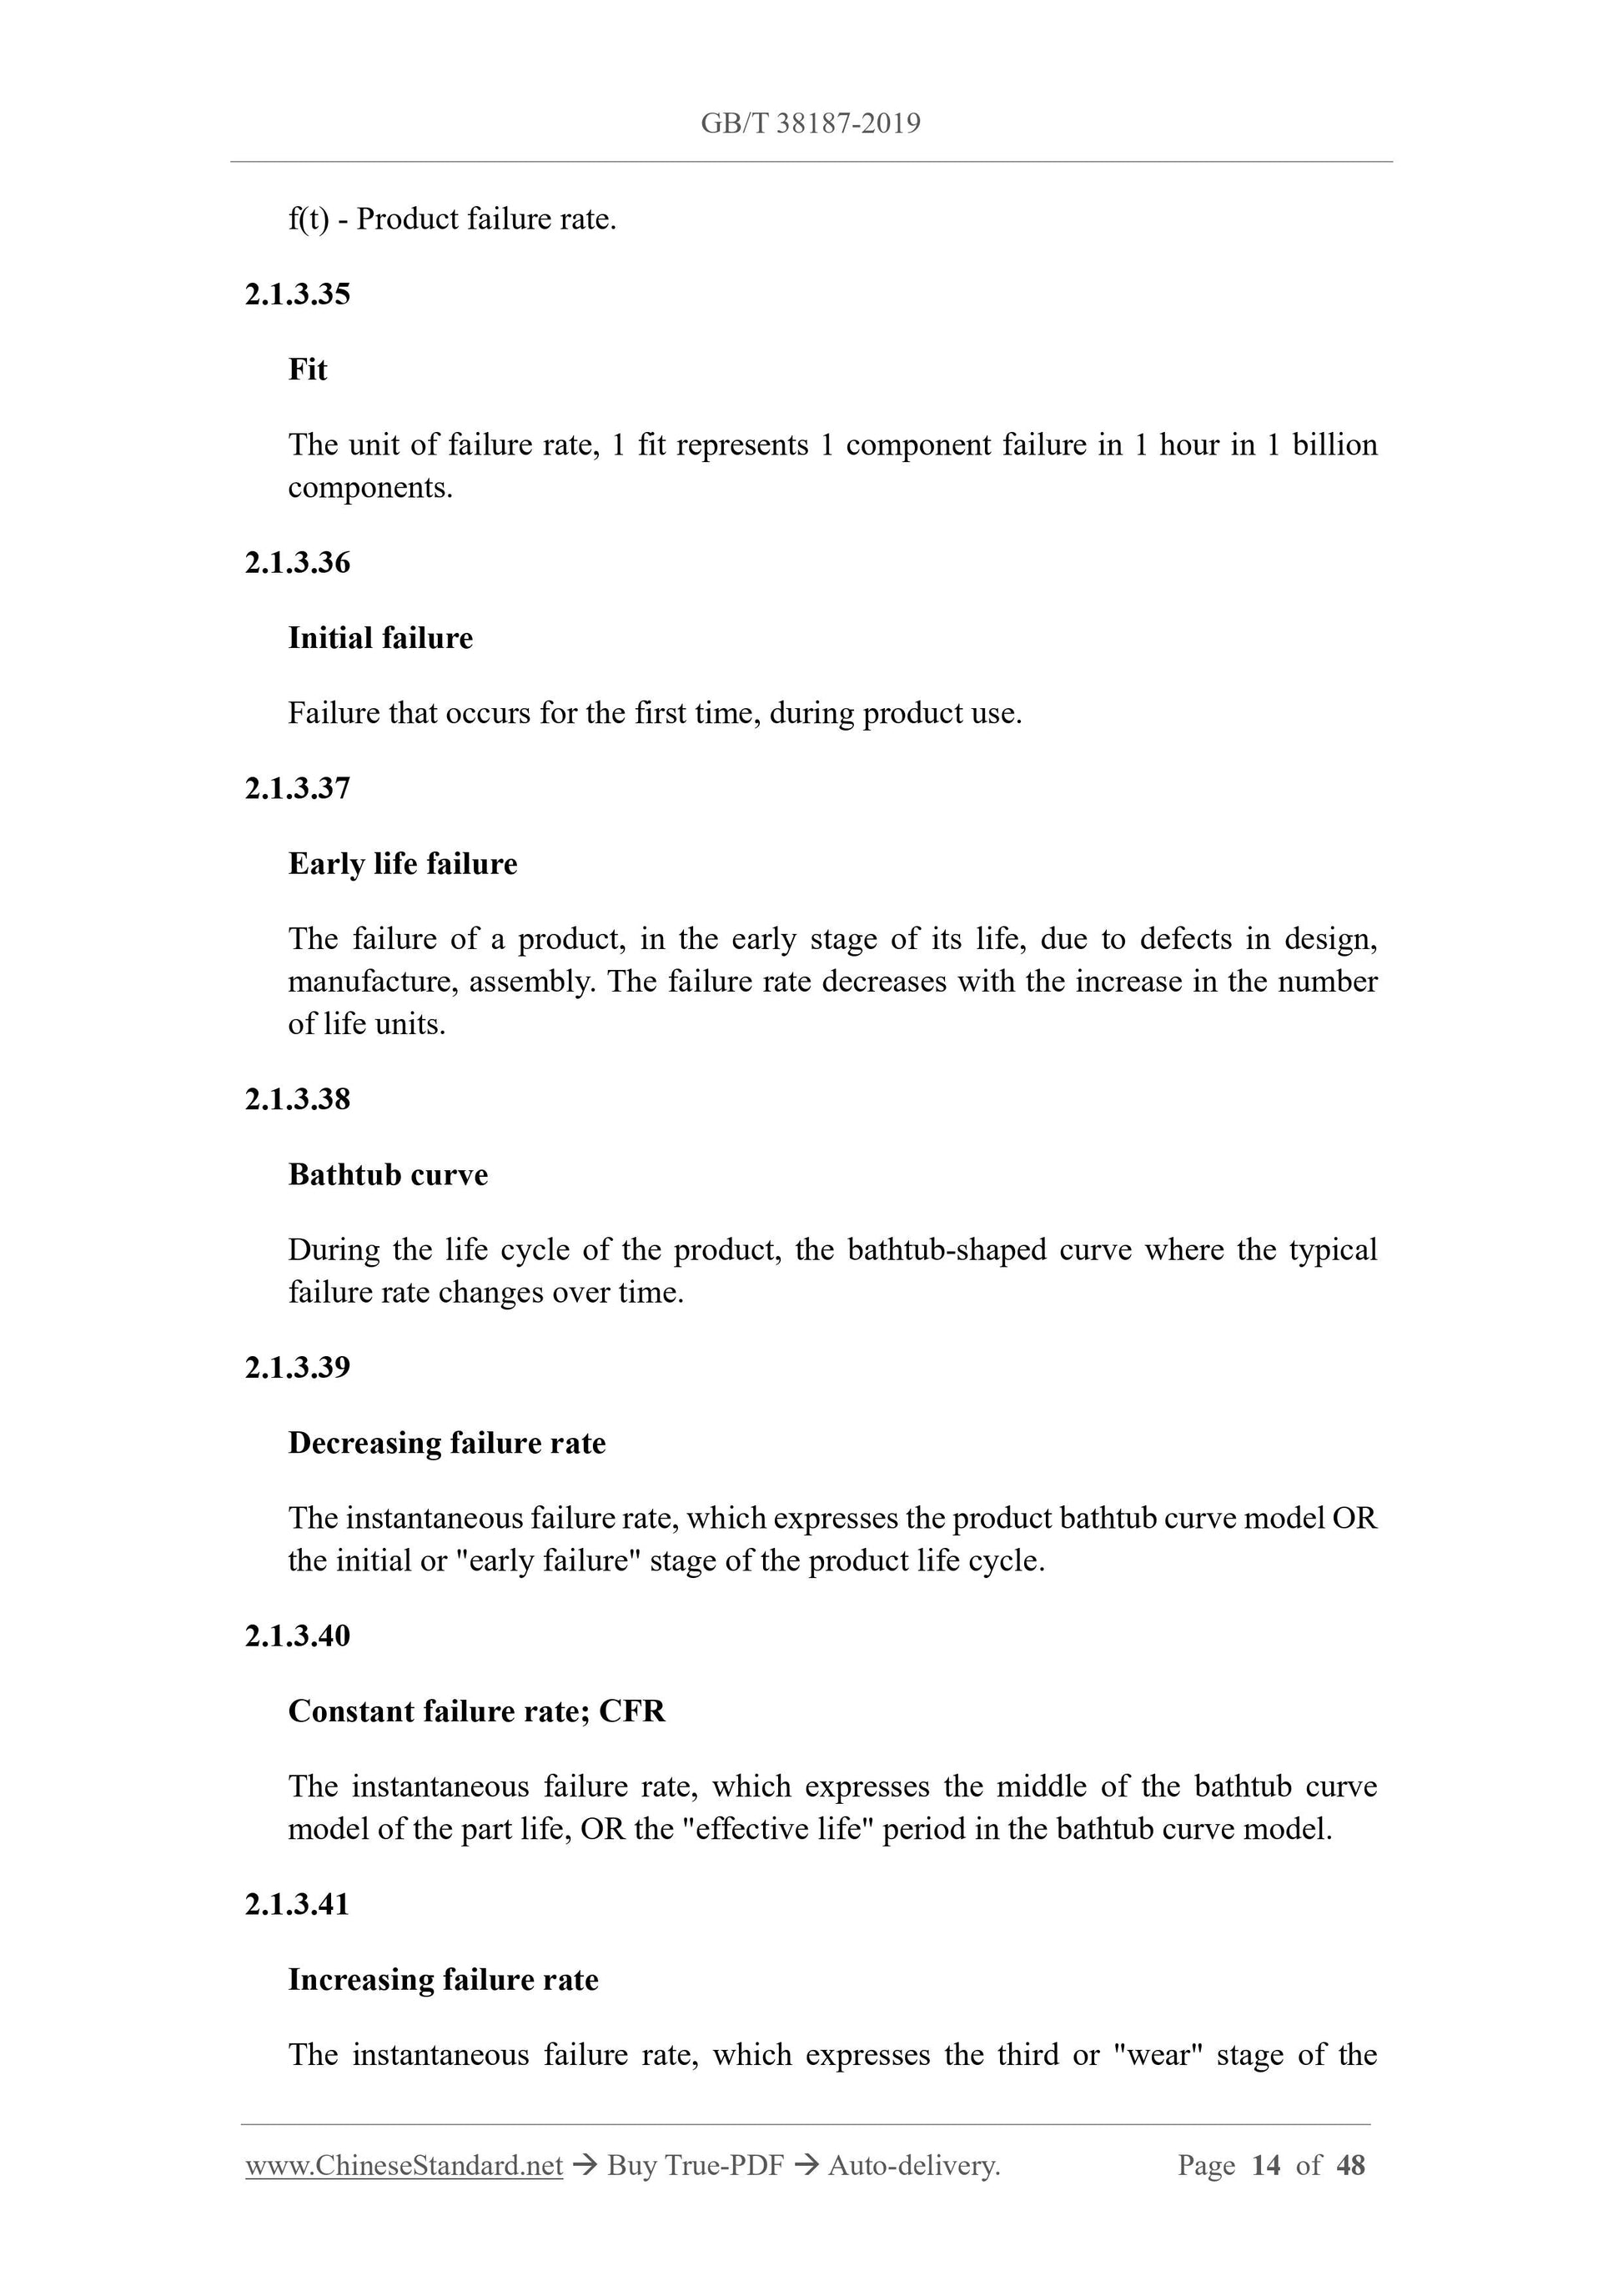 GB/T 38187-2019 Page 10